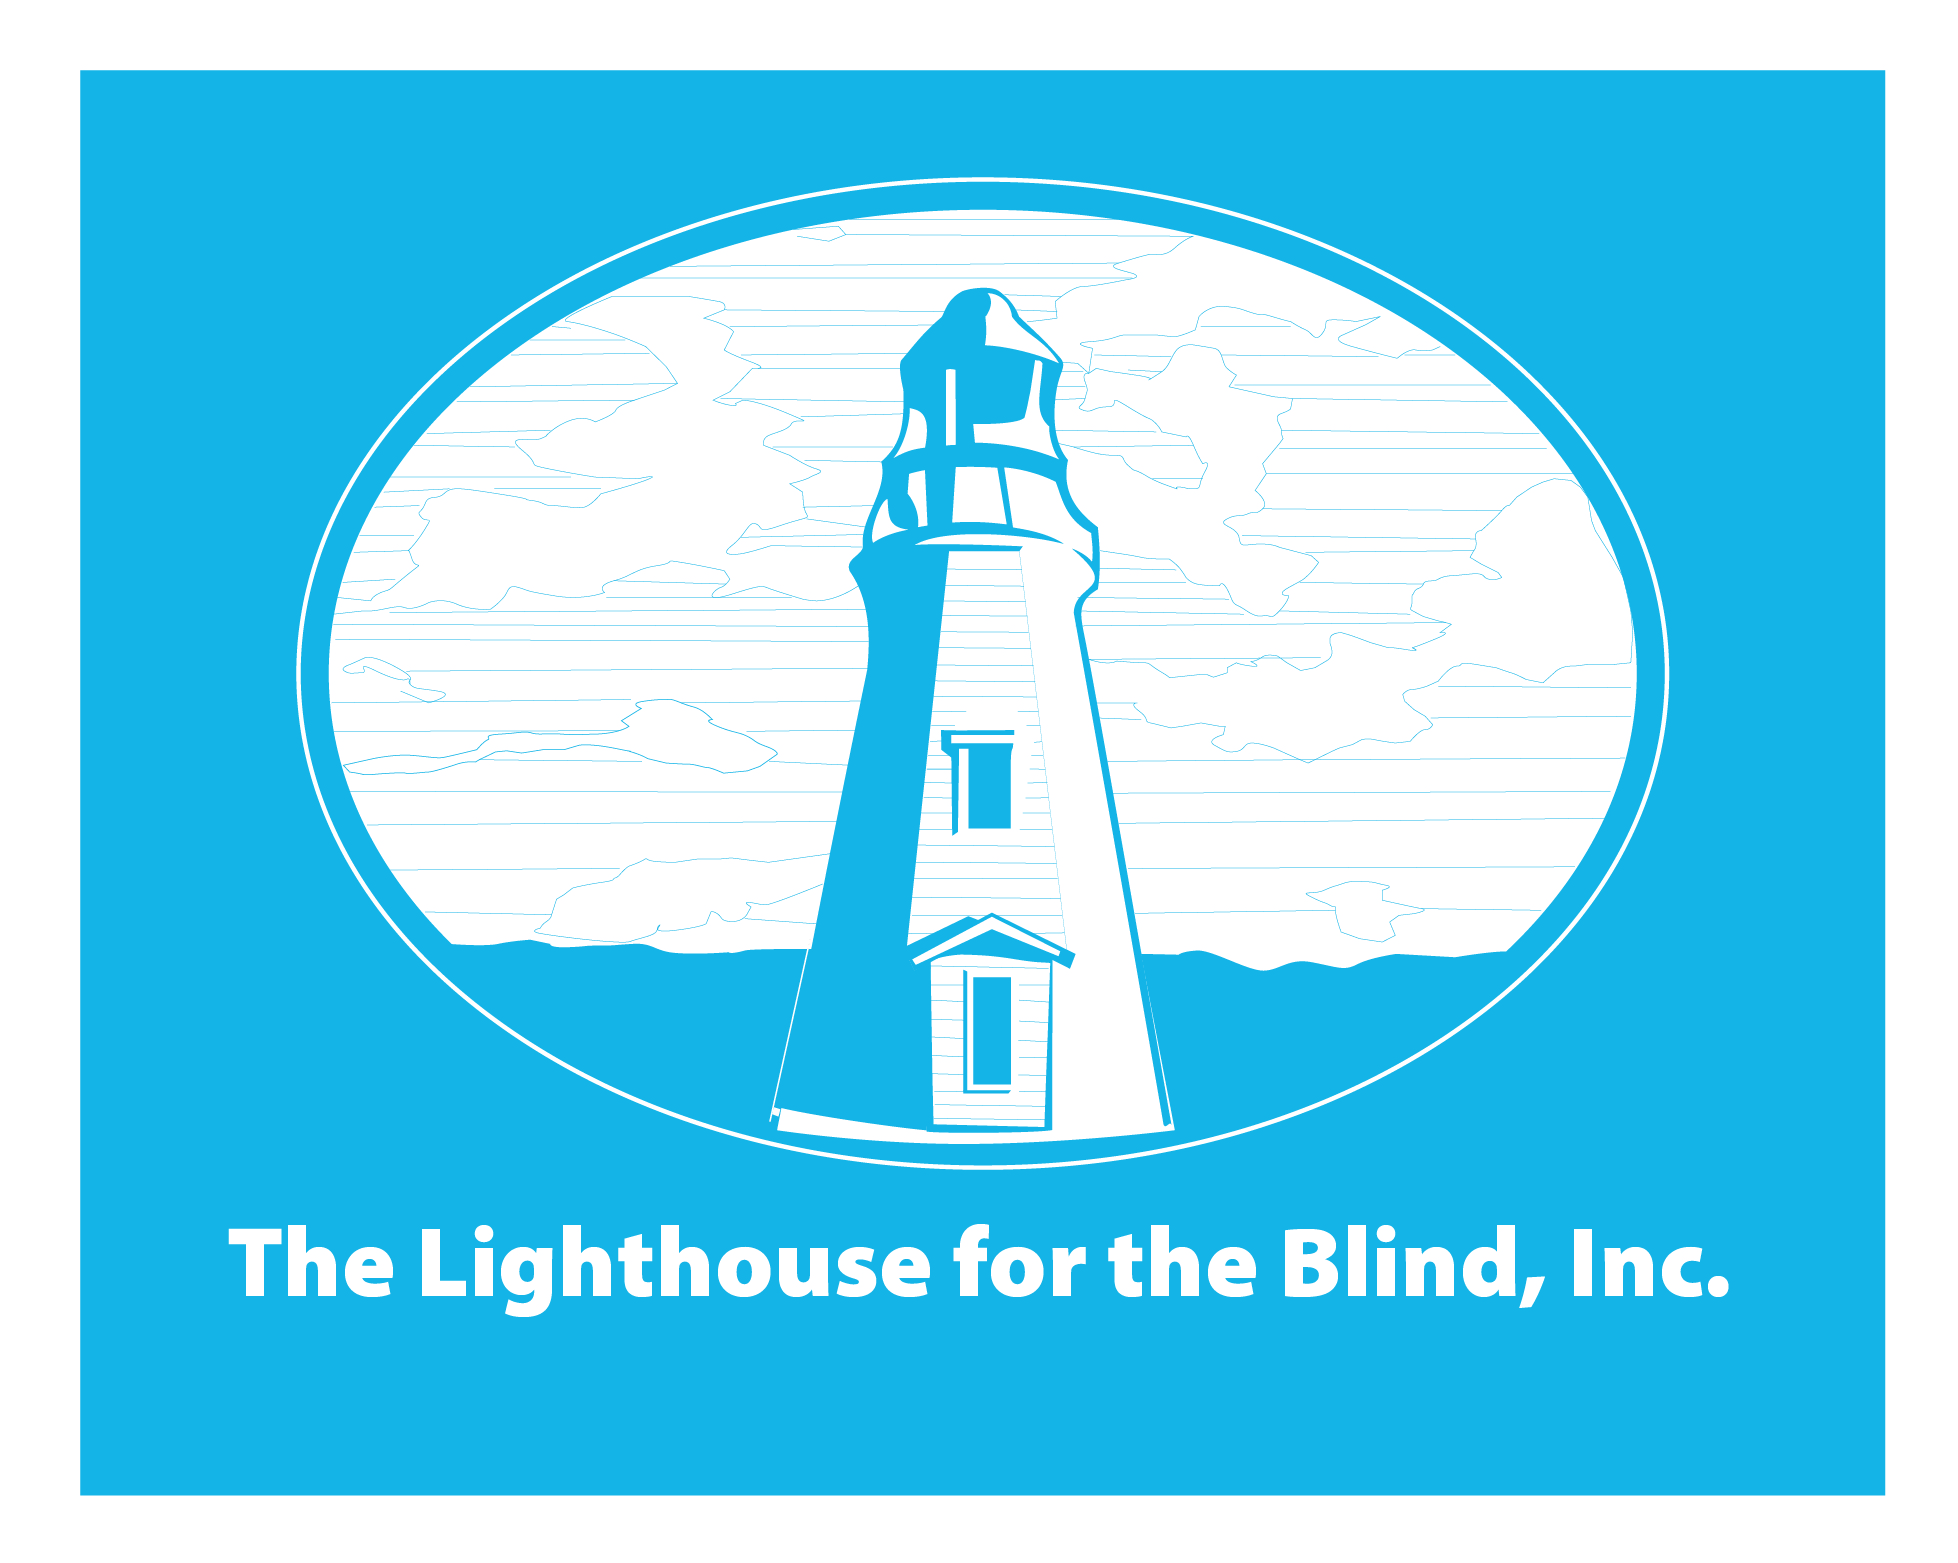 The Lighthouse for the Blind, Inc. logo